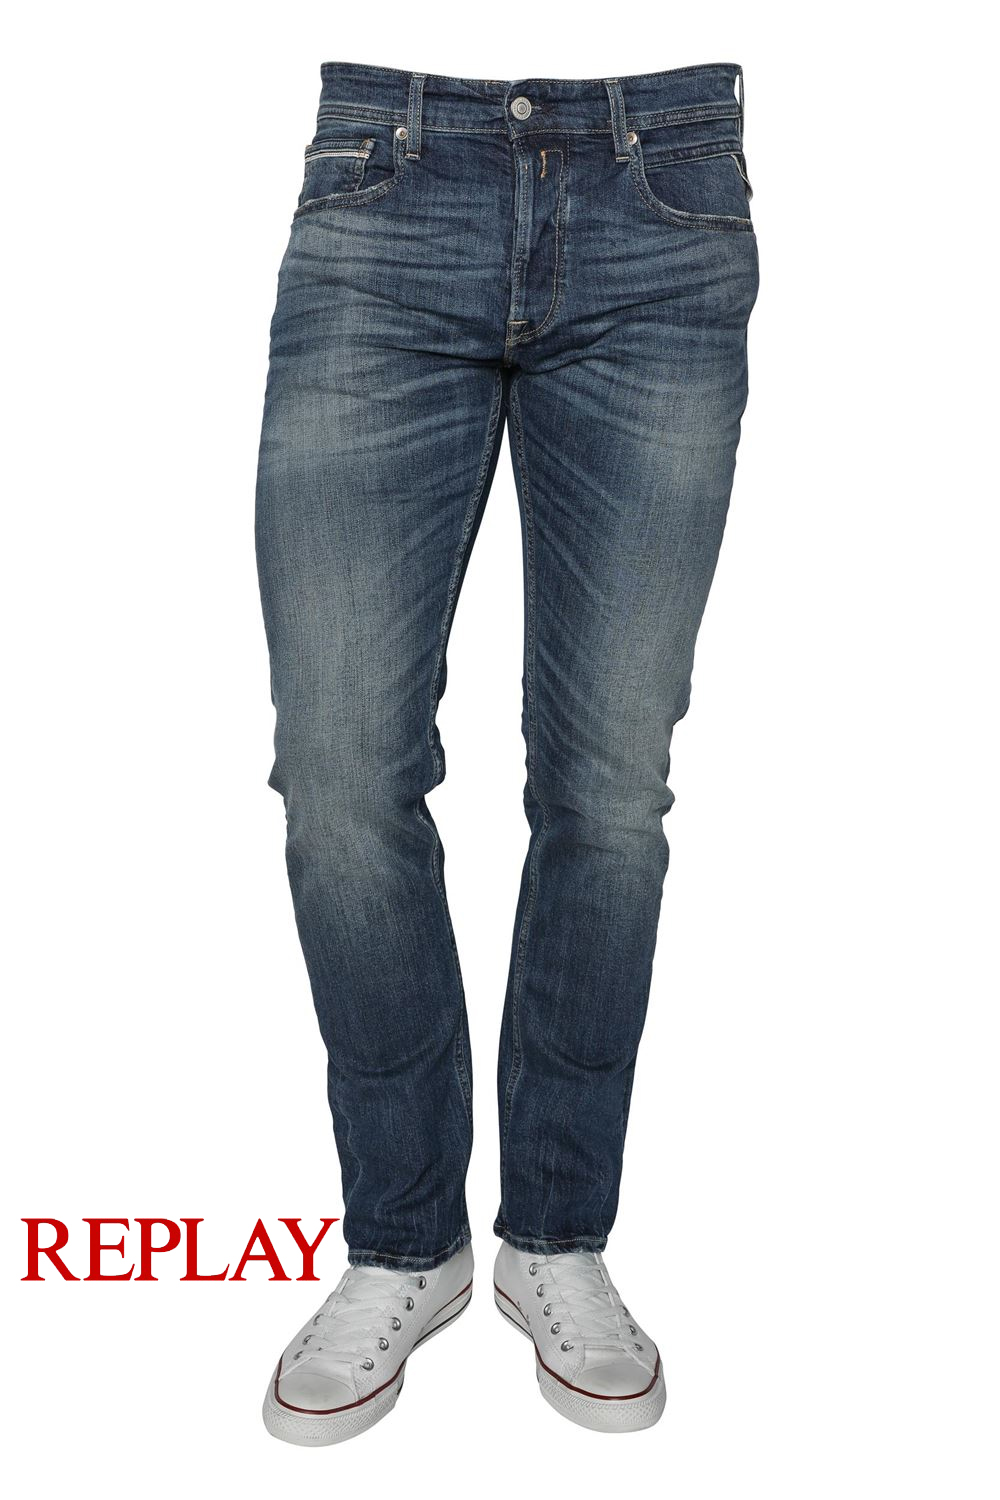 Grover Replay jeans